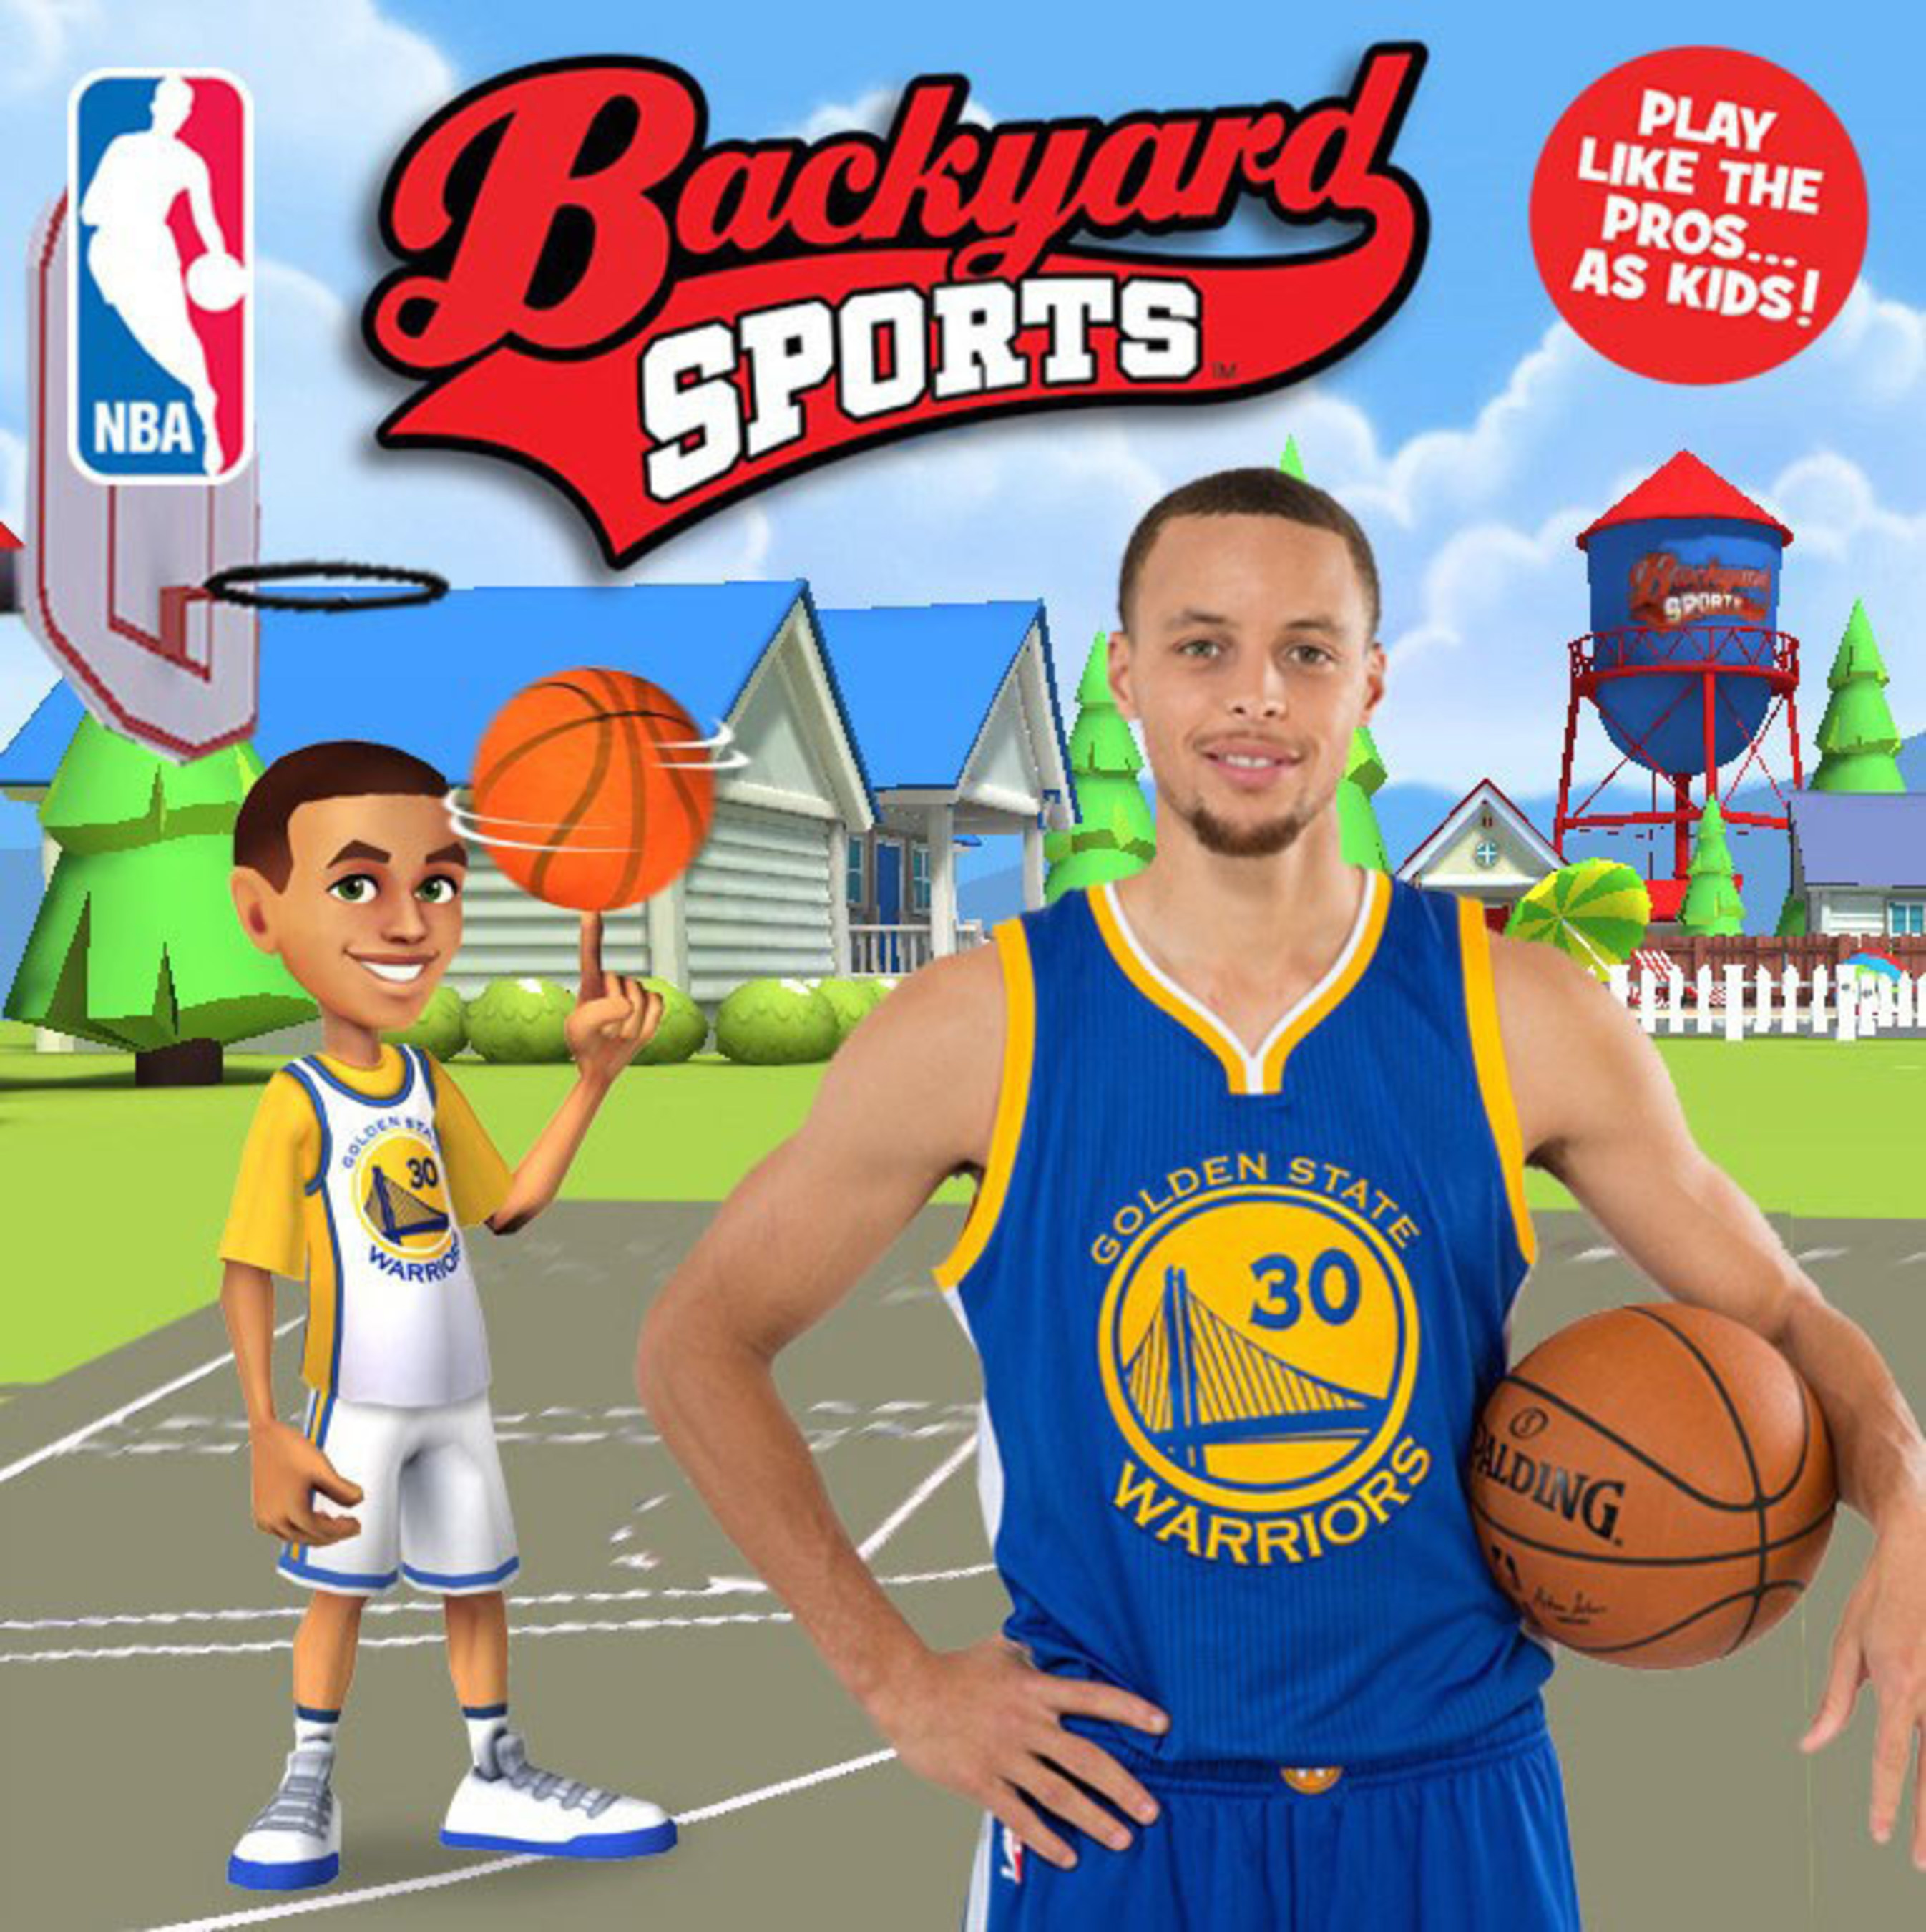 Day 6 Sports Group Teams With NBA To Re Launch Backyard Sports